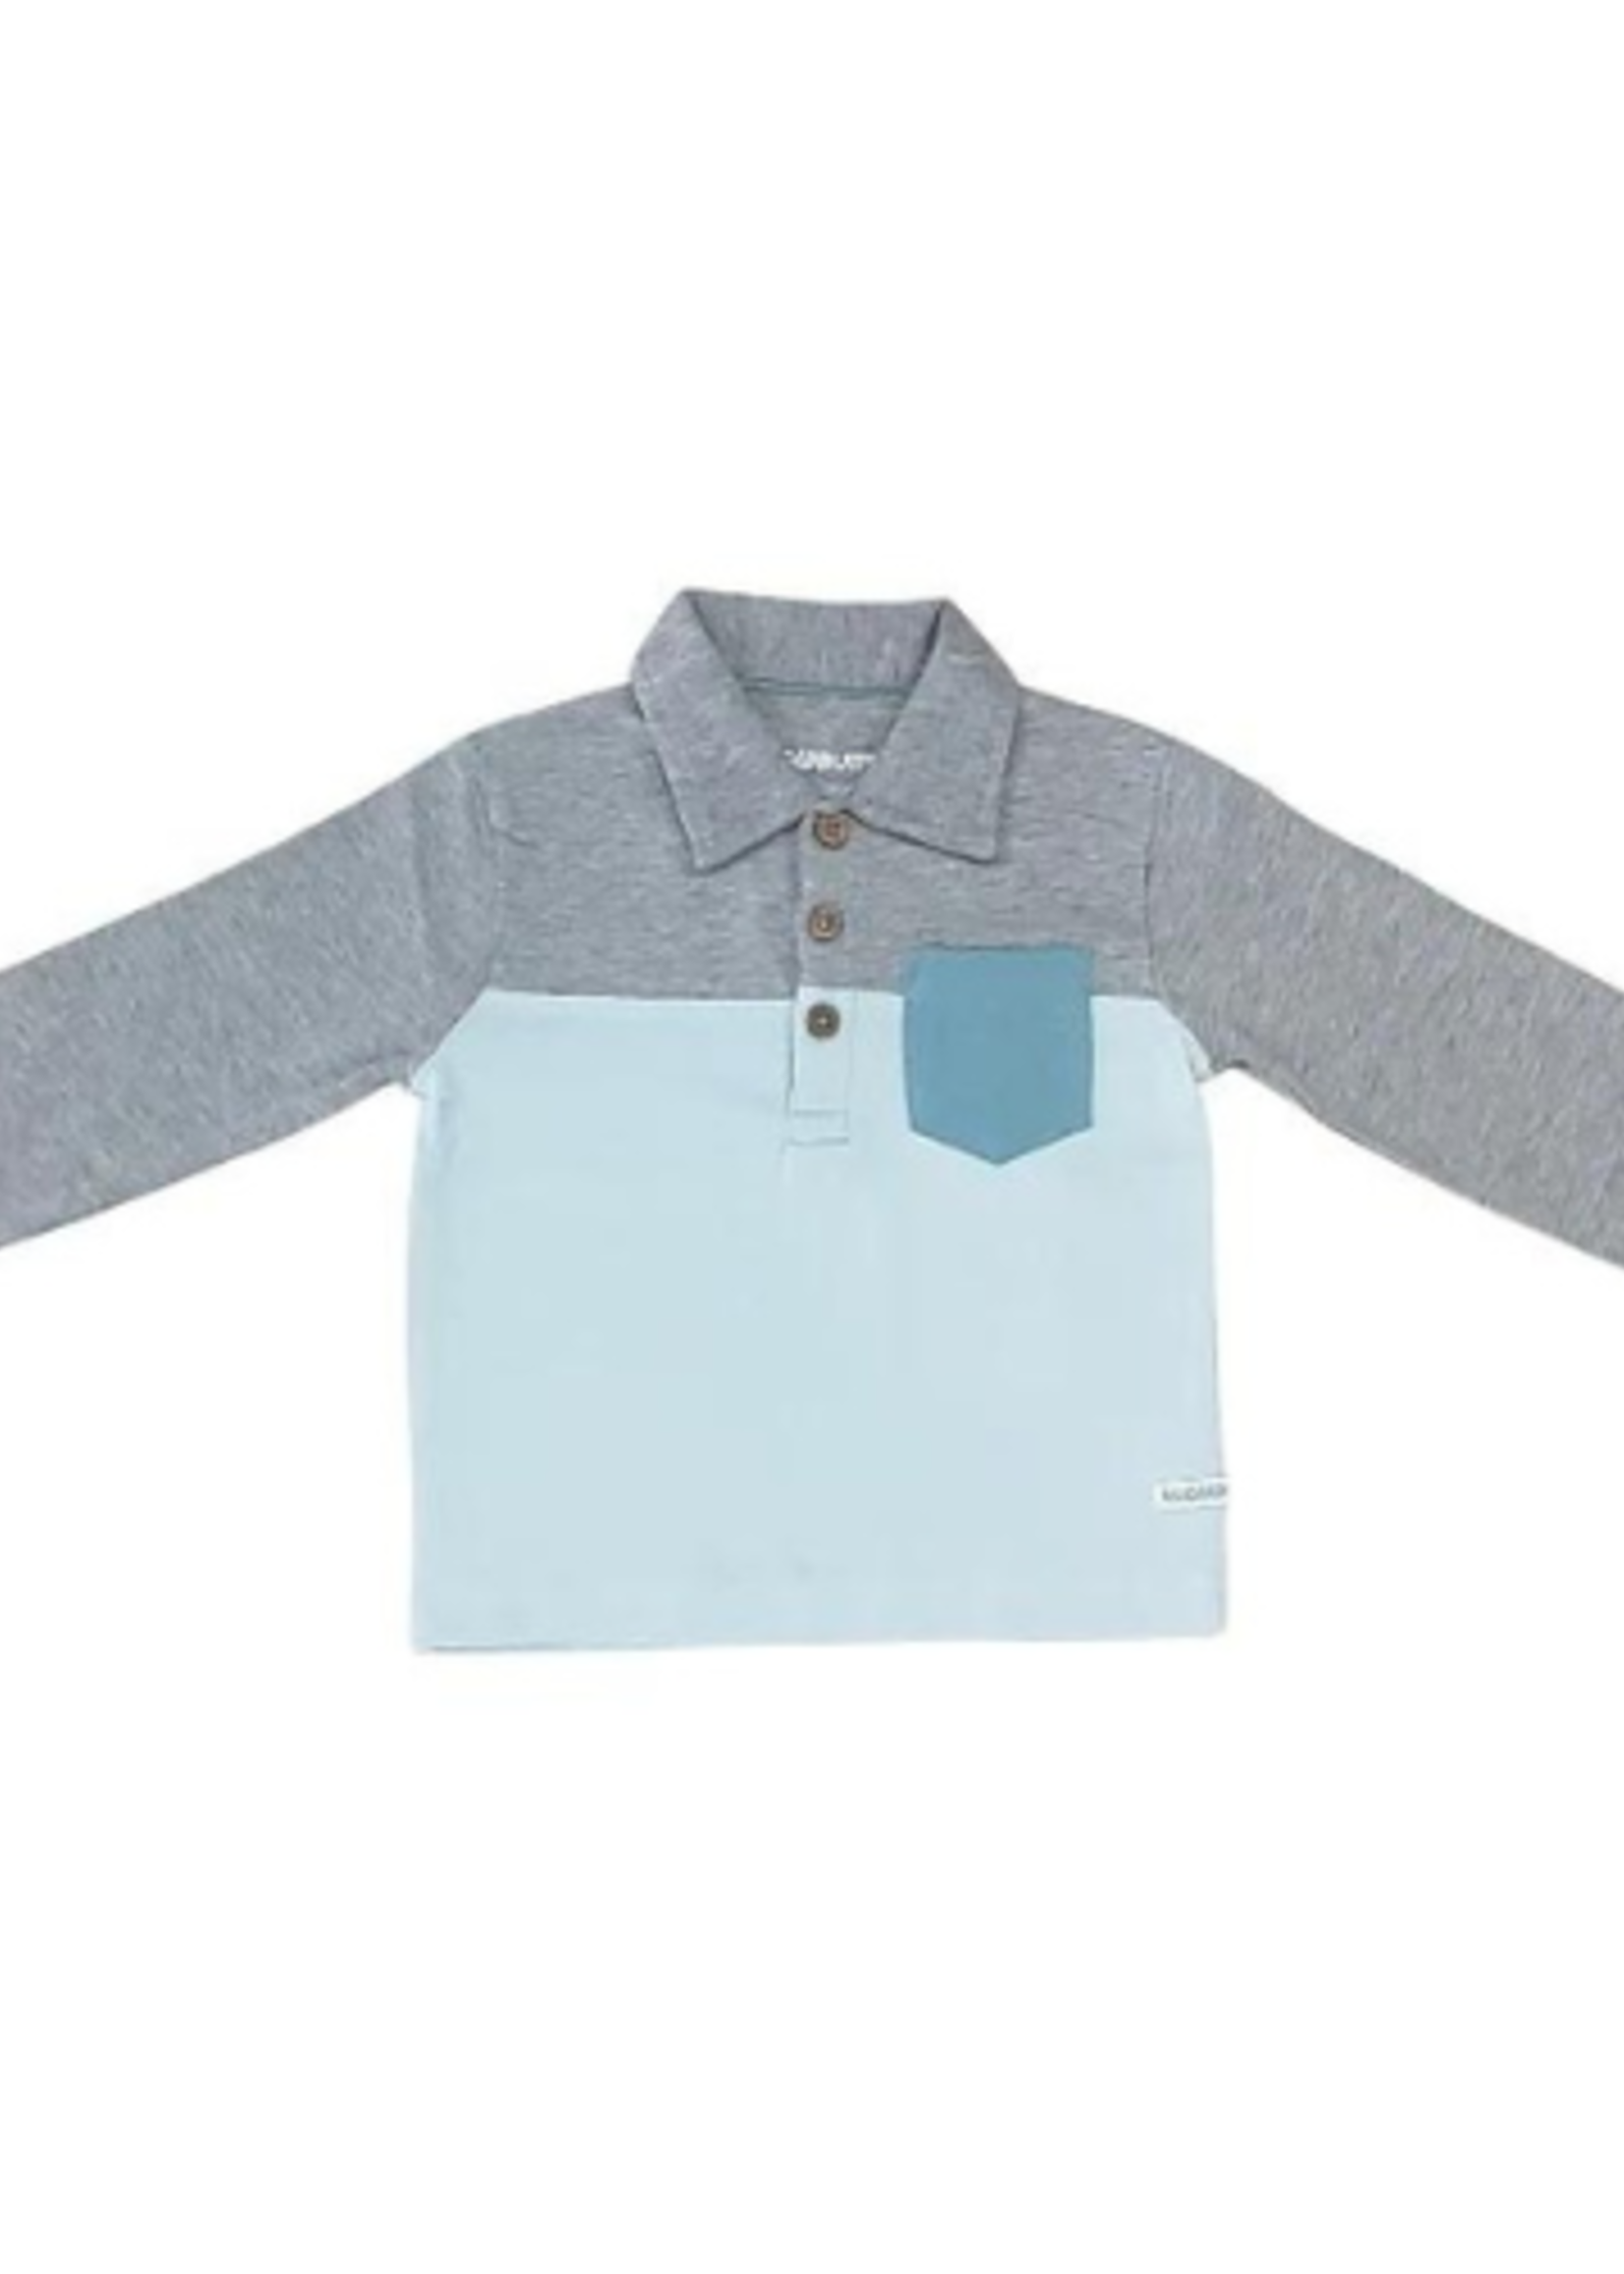 Rugged Butts Heather Gray & Antique Blue Color Block Polo